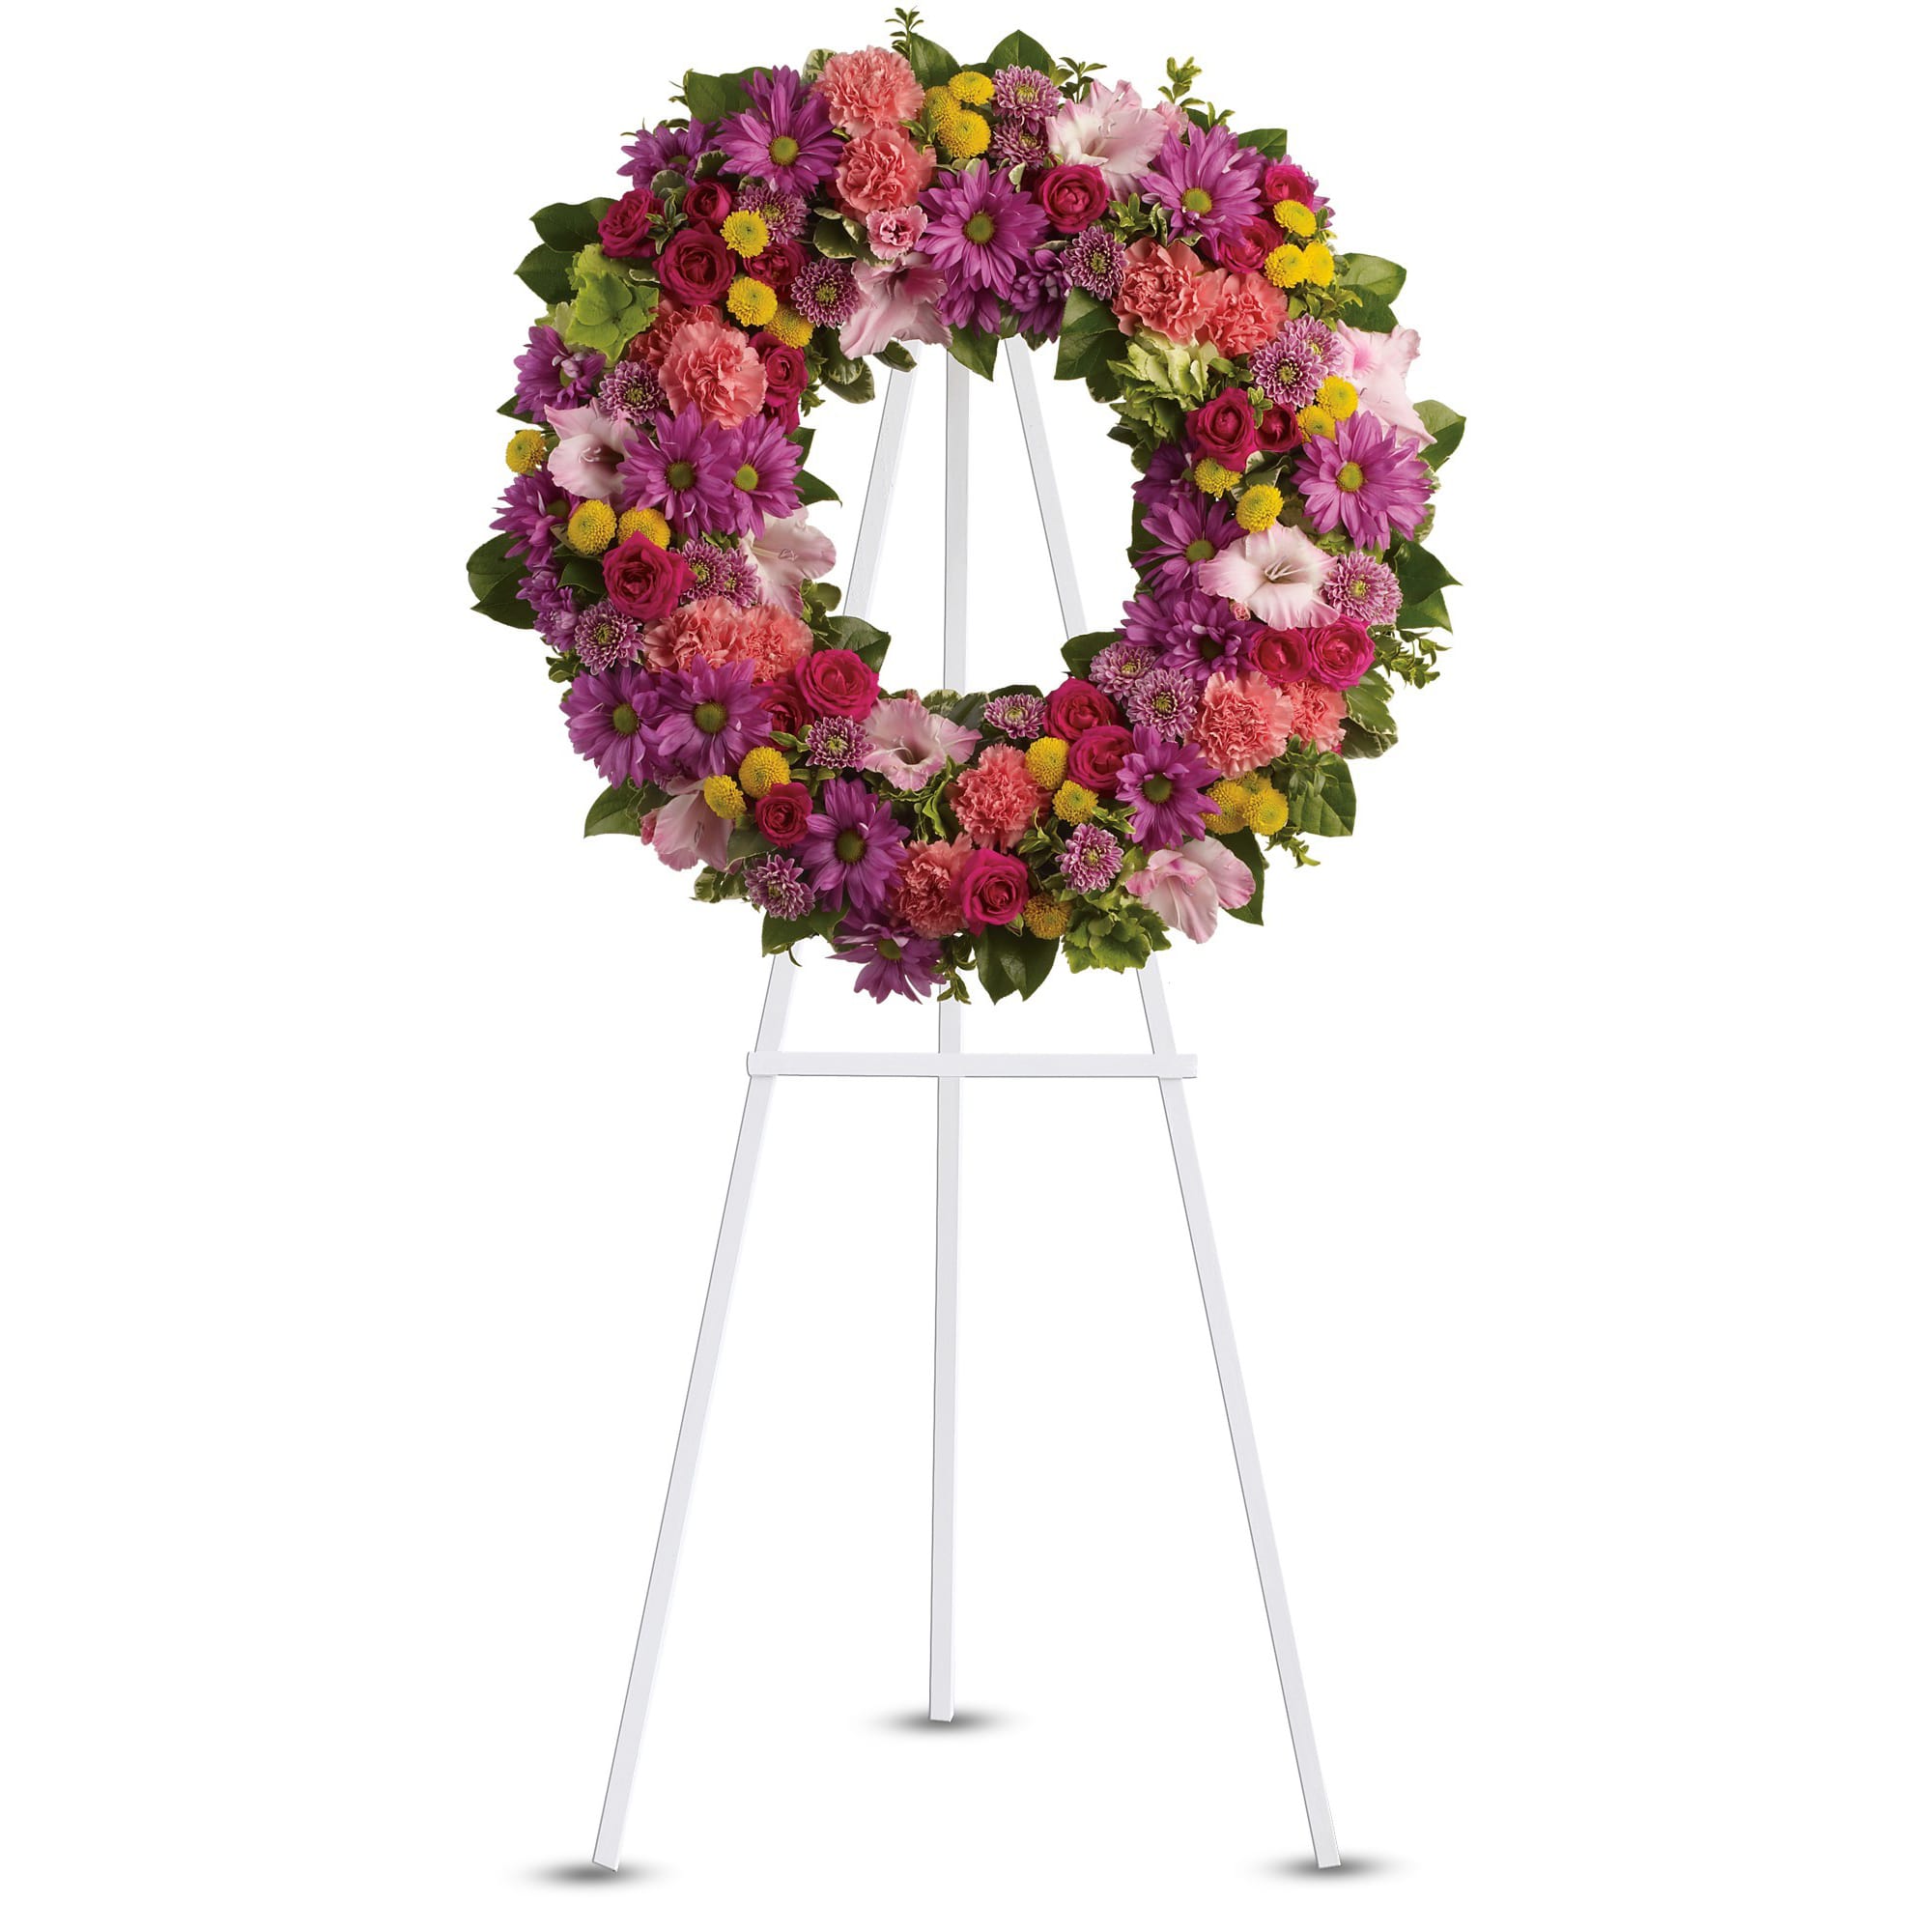 Ringed by Love by Teleflora - The memory of brighter days is always a comfort to those in mourning. This lovely wreath will display your compassion beautifully. 